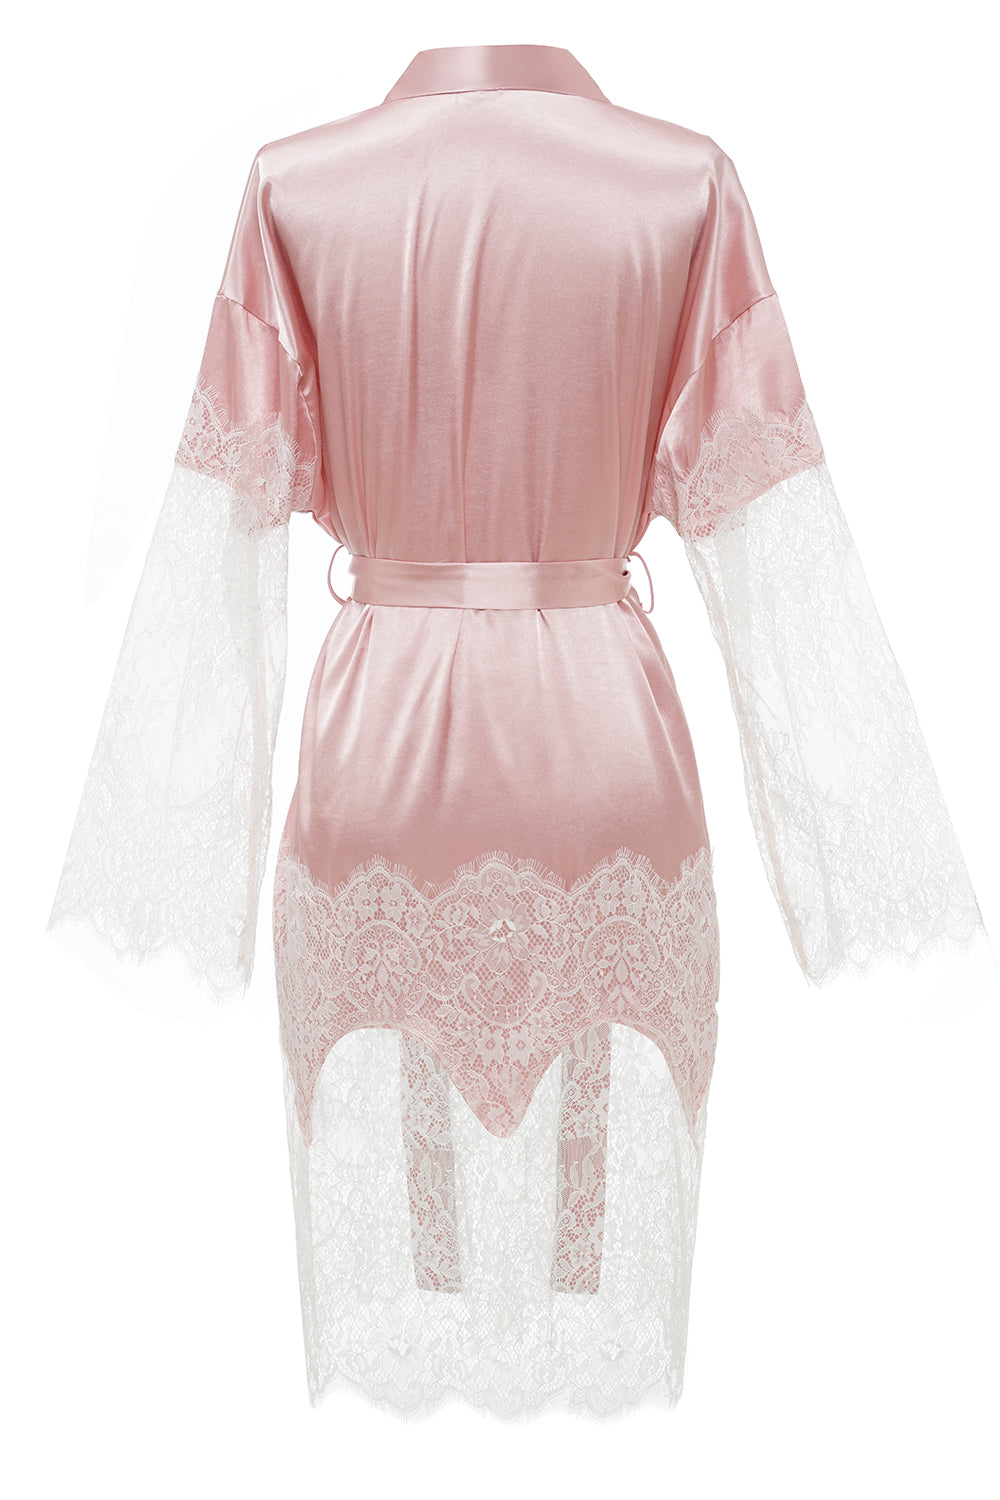 Pink Bridesmaid Robe With Lace